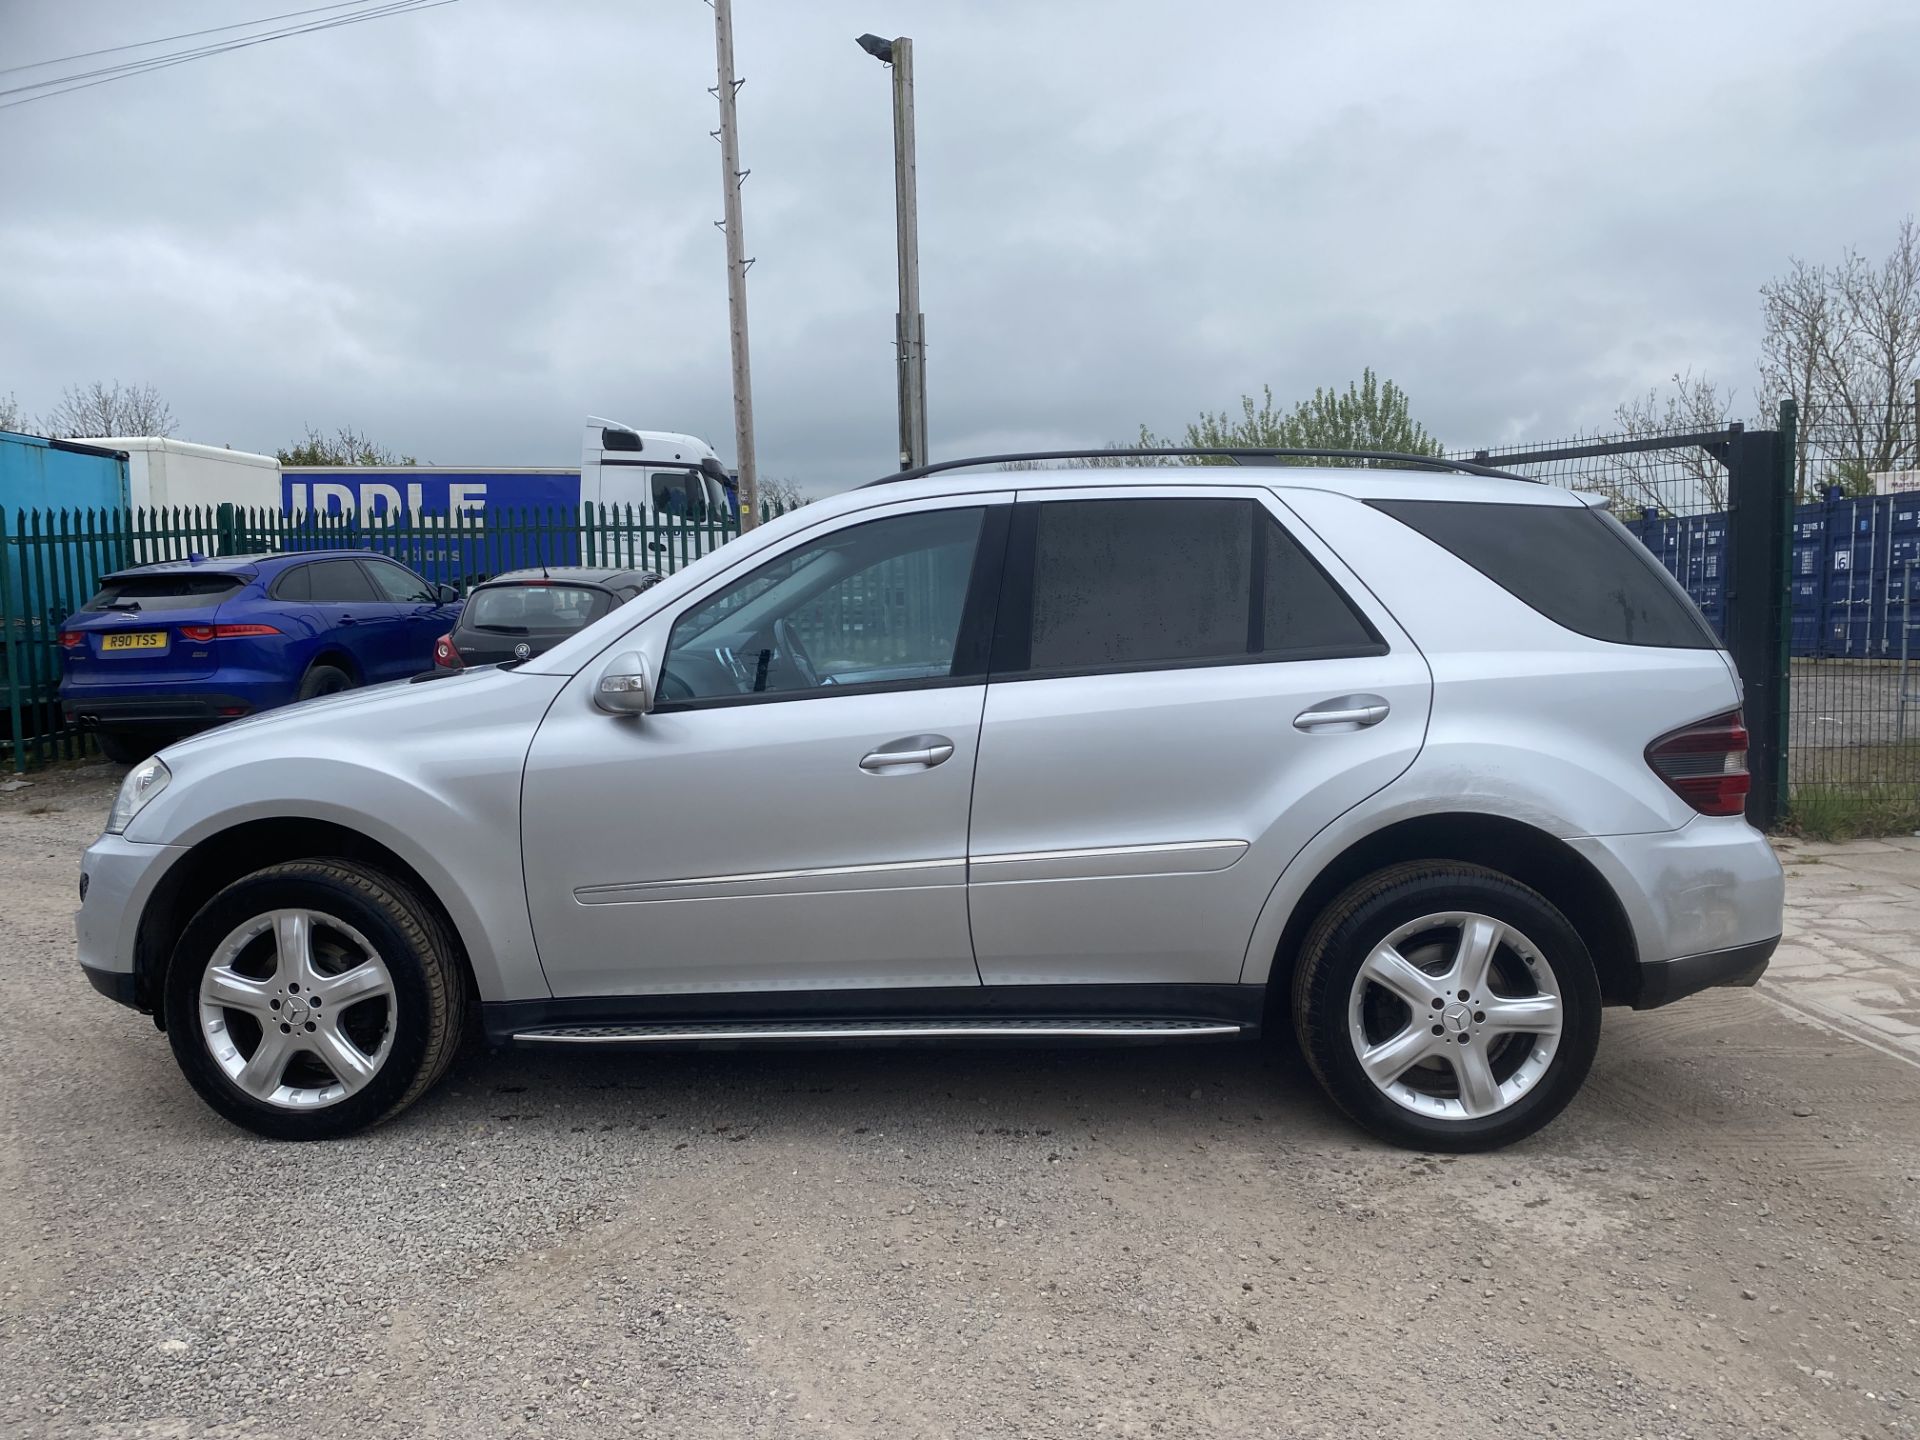 (Reserve Met) Mercedes ML280 Cdi (SPORT) Auto 3.0v6 Diesel - 2008 Reg - Only 94000 Miles Fsh Leather - Image 5 of 21